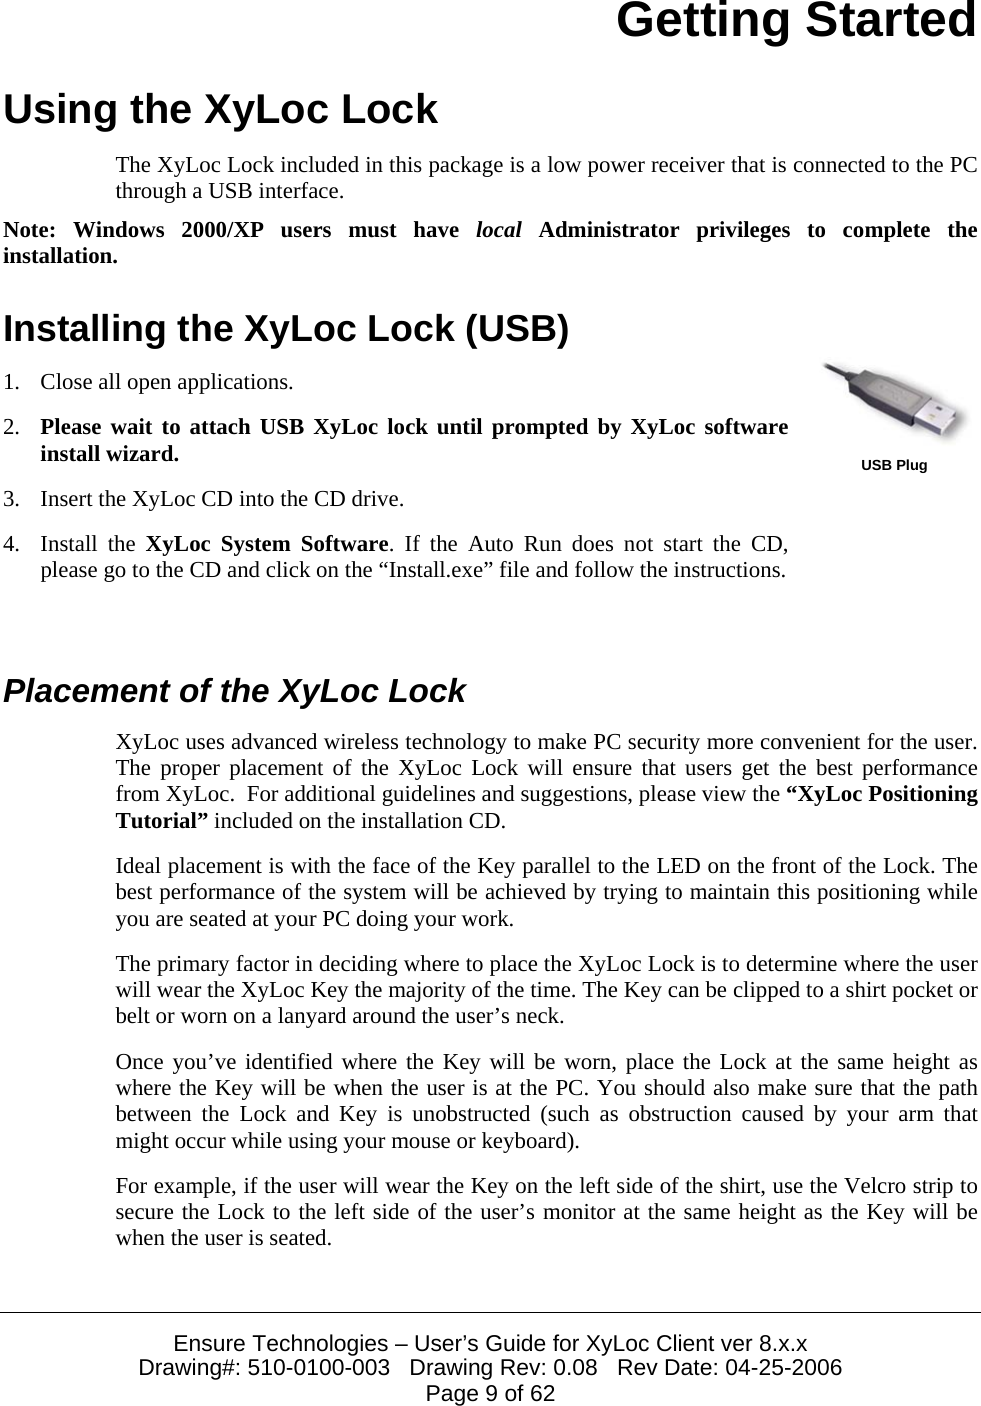  Ensure Technologies – User’s Guide for XyLoc Client ver 8.x.x Drawing#: 510-0100-003   Drawing Rev: 0.08   Rev Date: 04-25-2006 Page 9 of 62 Getting Started Using the XyLoc Lock The XyLoc Lock included in this package is a low power receiver that is connected to the PC through a USB interface. Note: Windows 2000/XP users must have local Administrator privileges to complete the installation. Installing the XyLoc Lock (USB) 1. Close all open applications. 2. Please wait to attach USB XyLoc lock until prompted by XyLoc software install wizard. 3. Insert the XyLoc CD into the CD drive. 4. Install the XyLoc System Software. If the Auto Run does not start the CD, please go to the CD and click on the “Install.exe” file and follow the instructions.  USB Plug  Placement of the XyLoc Lock XyLoc uses advanced wireless technology to make PC security more convenient for the user. The proper placement of the XyLoc Lock will ensure that users get the best performance from XyLoc.  For additional guidelines and suggestions, please view the “XyLoc Positioning Tutorial” included on the installation CD. Ideal placement is with the face of the Key parallel to the LED on the front of the Lock. The best performance of the system will be achieved by trying to maintain this positioning while you are seated at your PC doing your work. The primary factor in deciding where to place the XyLoc Lock is to determine where the user will wear the XyLoc Key the majority of the time. The Key can be clipped to a shirt pocket or belt or worn on a lanyard around the user’s neck. Once you’ve identified where the Key will be worn, place the Lock at the same height as where the Key will be when the user is at the PC. You should also make sure that the path between the Lock and Key is unobstructed (such as obstruction caused by your arm that might occur while using your mouse or keyboard). For example, if the user will wear the Key on the left side of the shirt, use the Velcro strip to secure the Lock to the left side of the user’s monitor at the same height as the Key will be when the user is seated. 